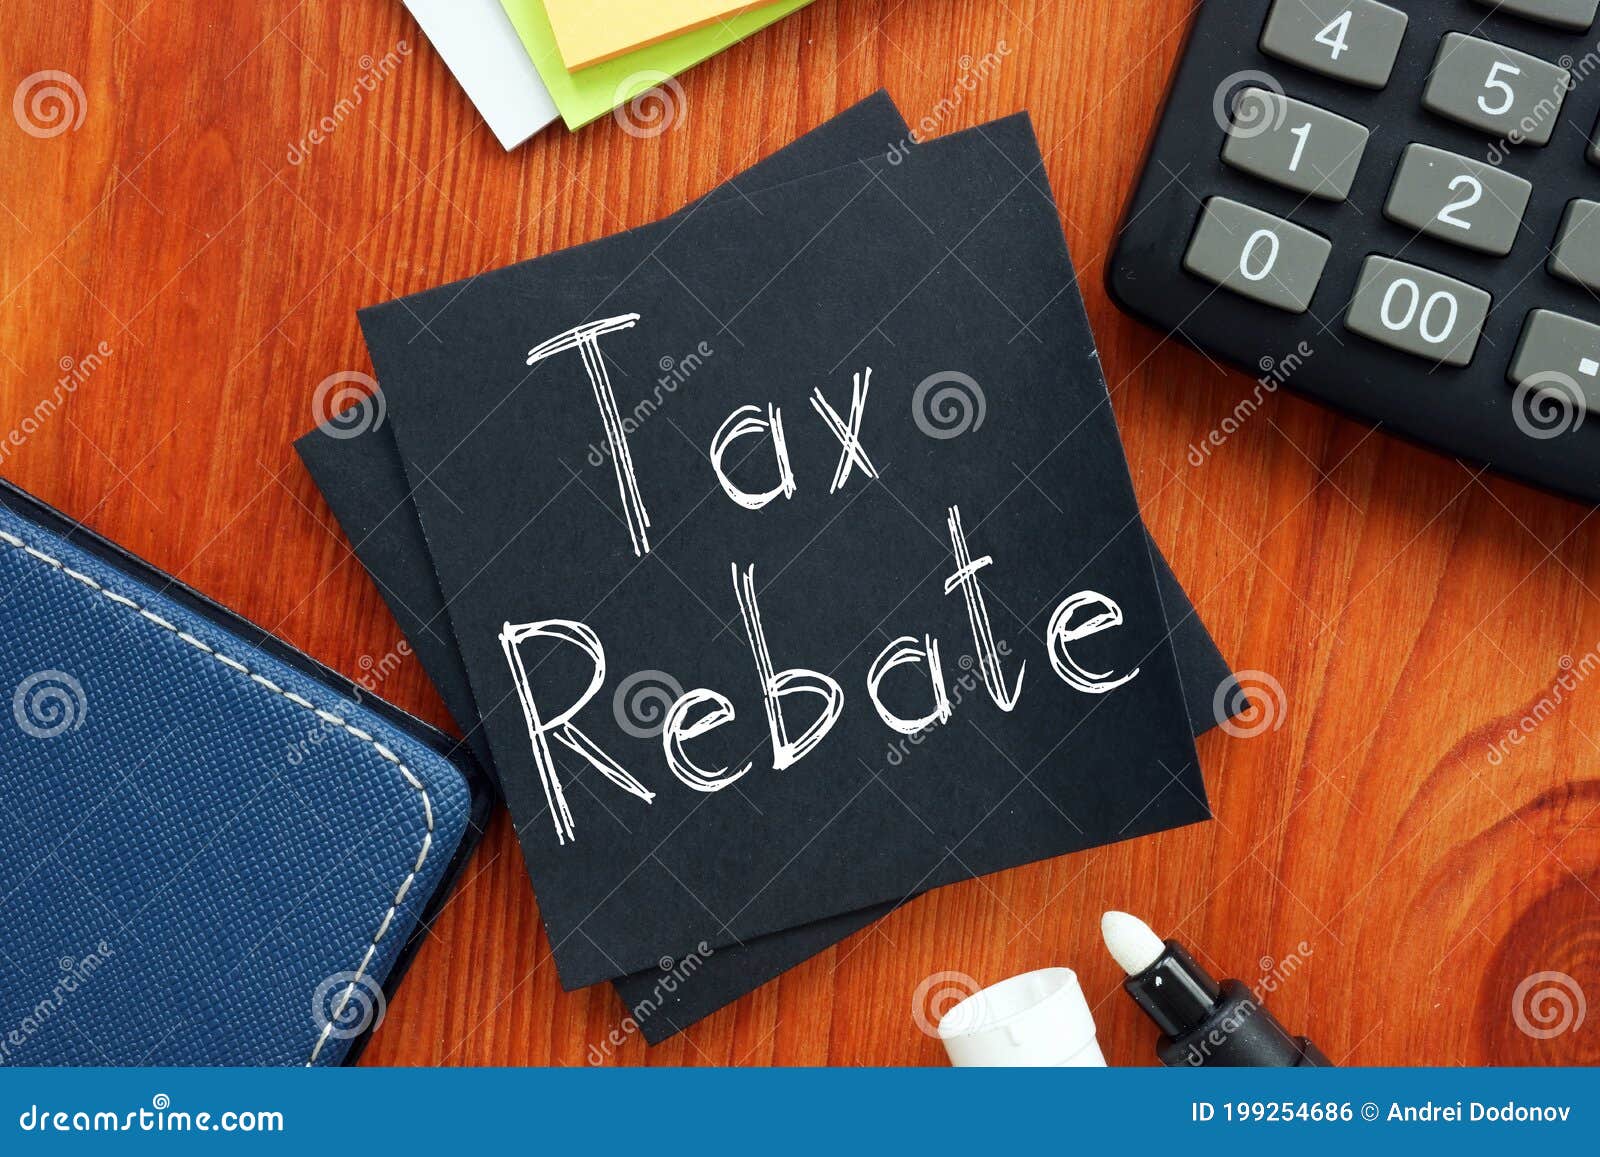 tax-rebate-is-shown-on-the-conceptual-business-photo-stock-photo